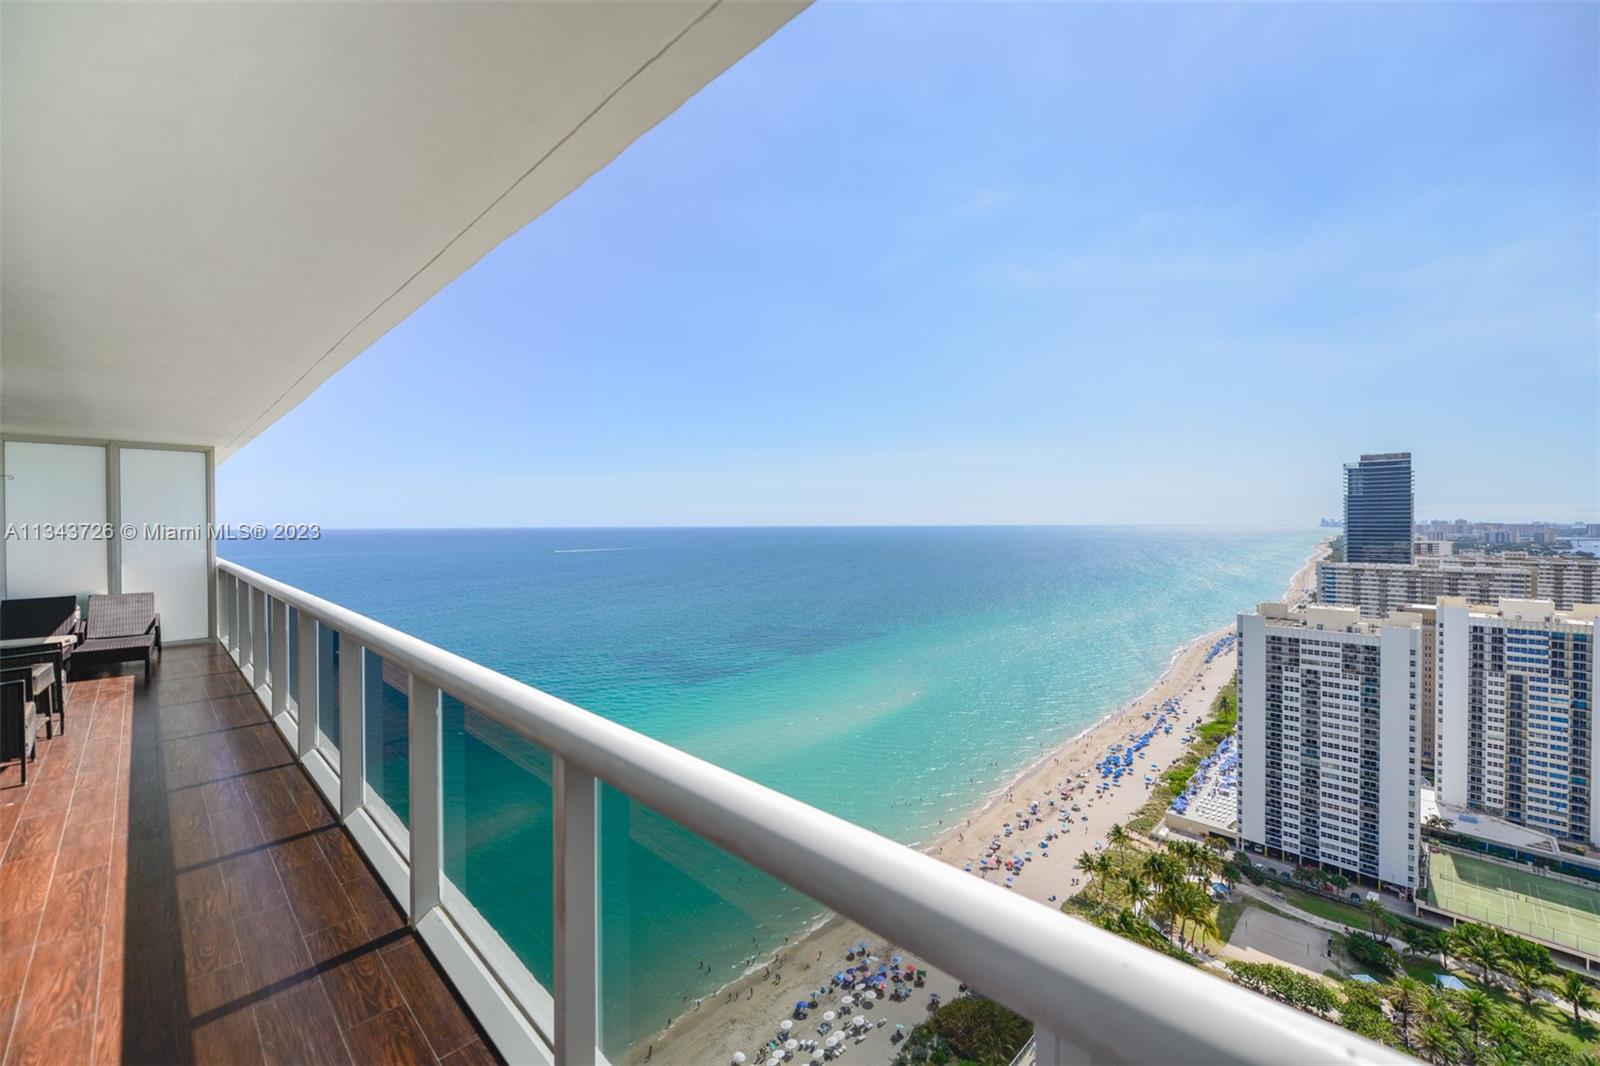 THE BEACH II CENTER TOWER A SECOND HOME BUYER OR INVESTORS DREAM. THE MINUTE YOU WALK INTO THE APART